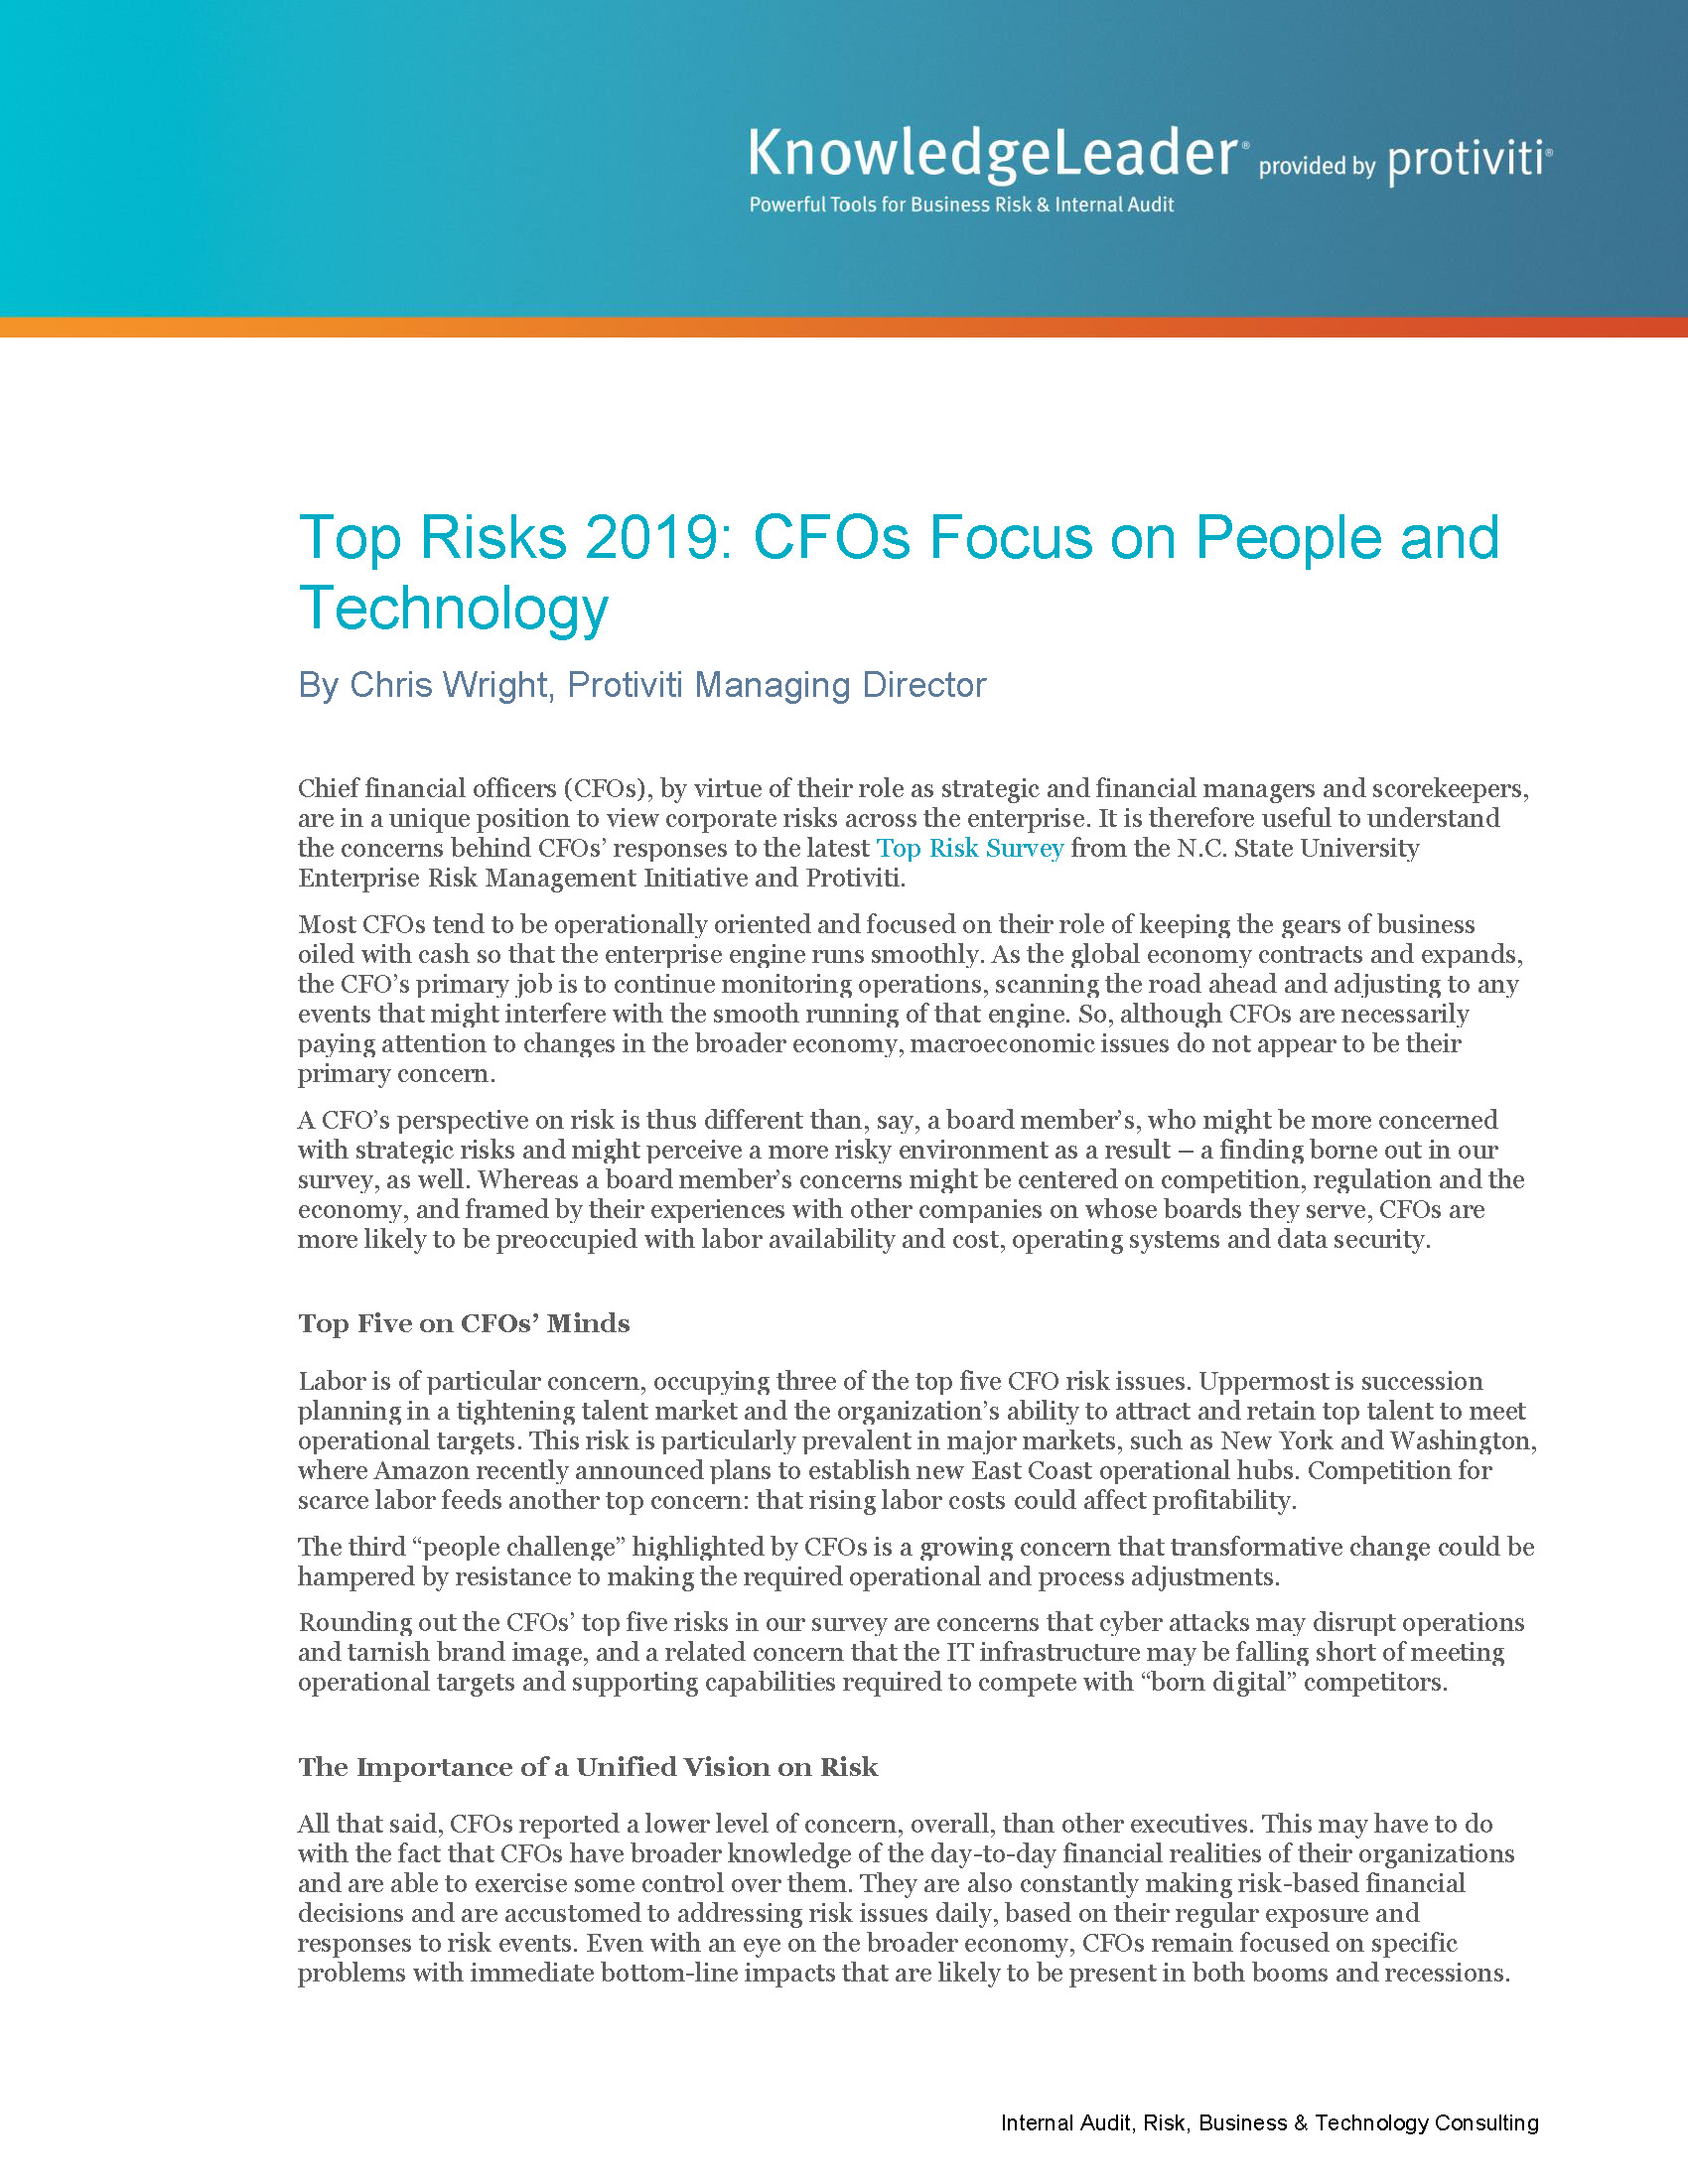 Screenshot of the first page of Top Risks 2019 CFOs Focus on People and Technology